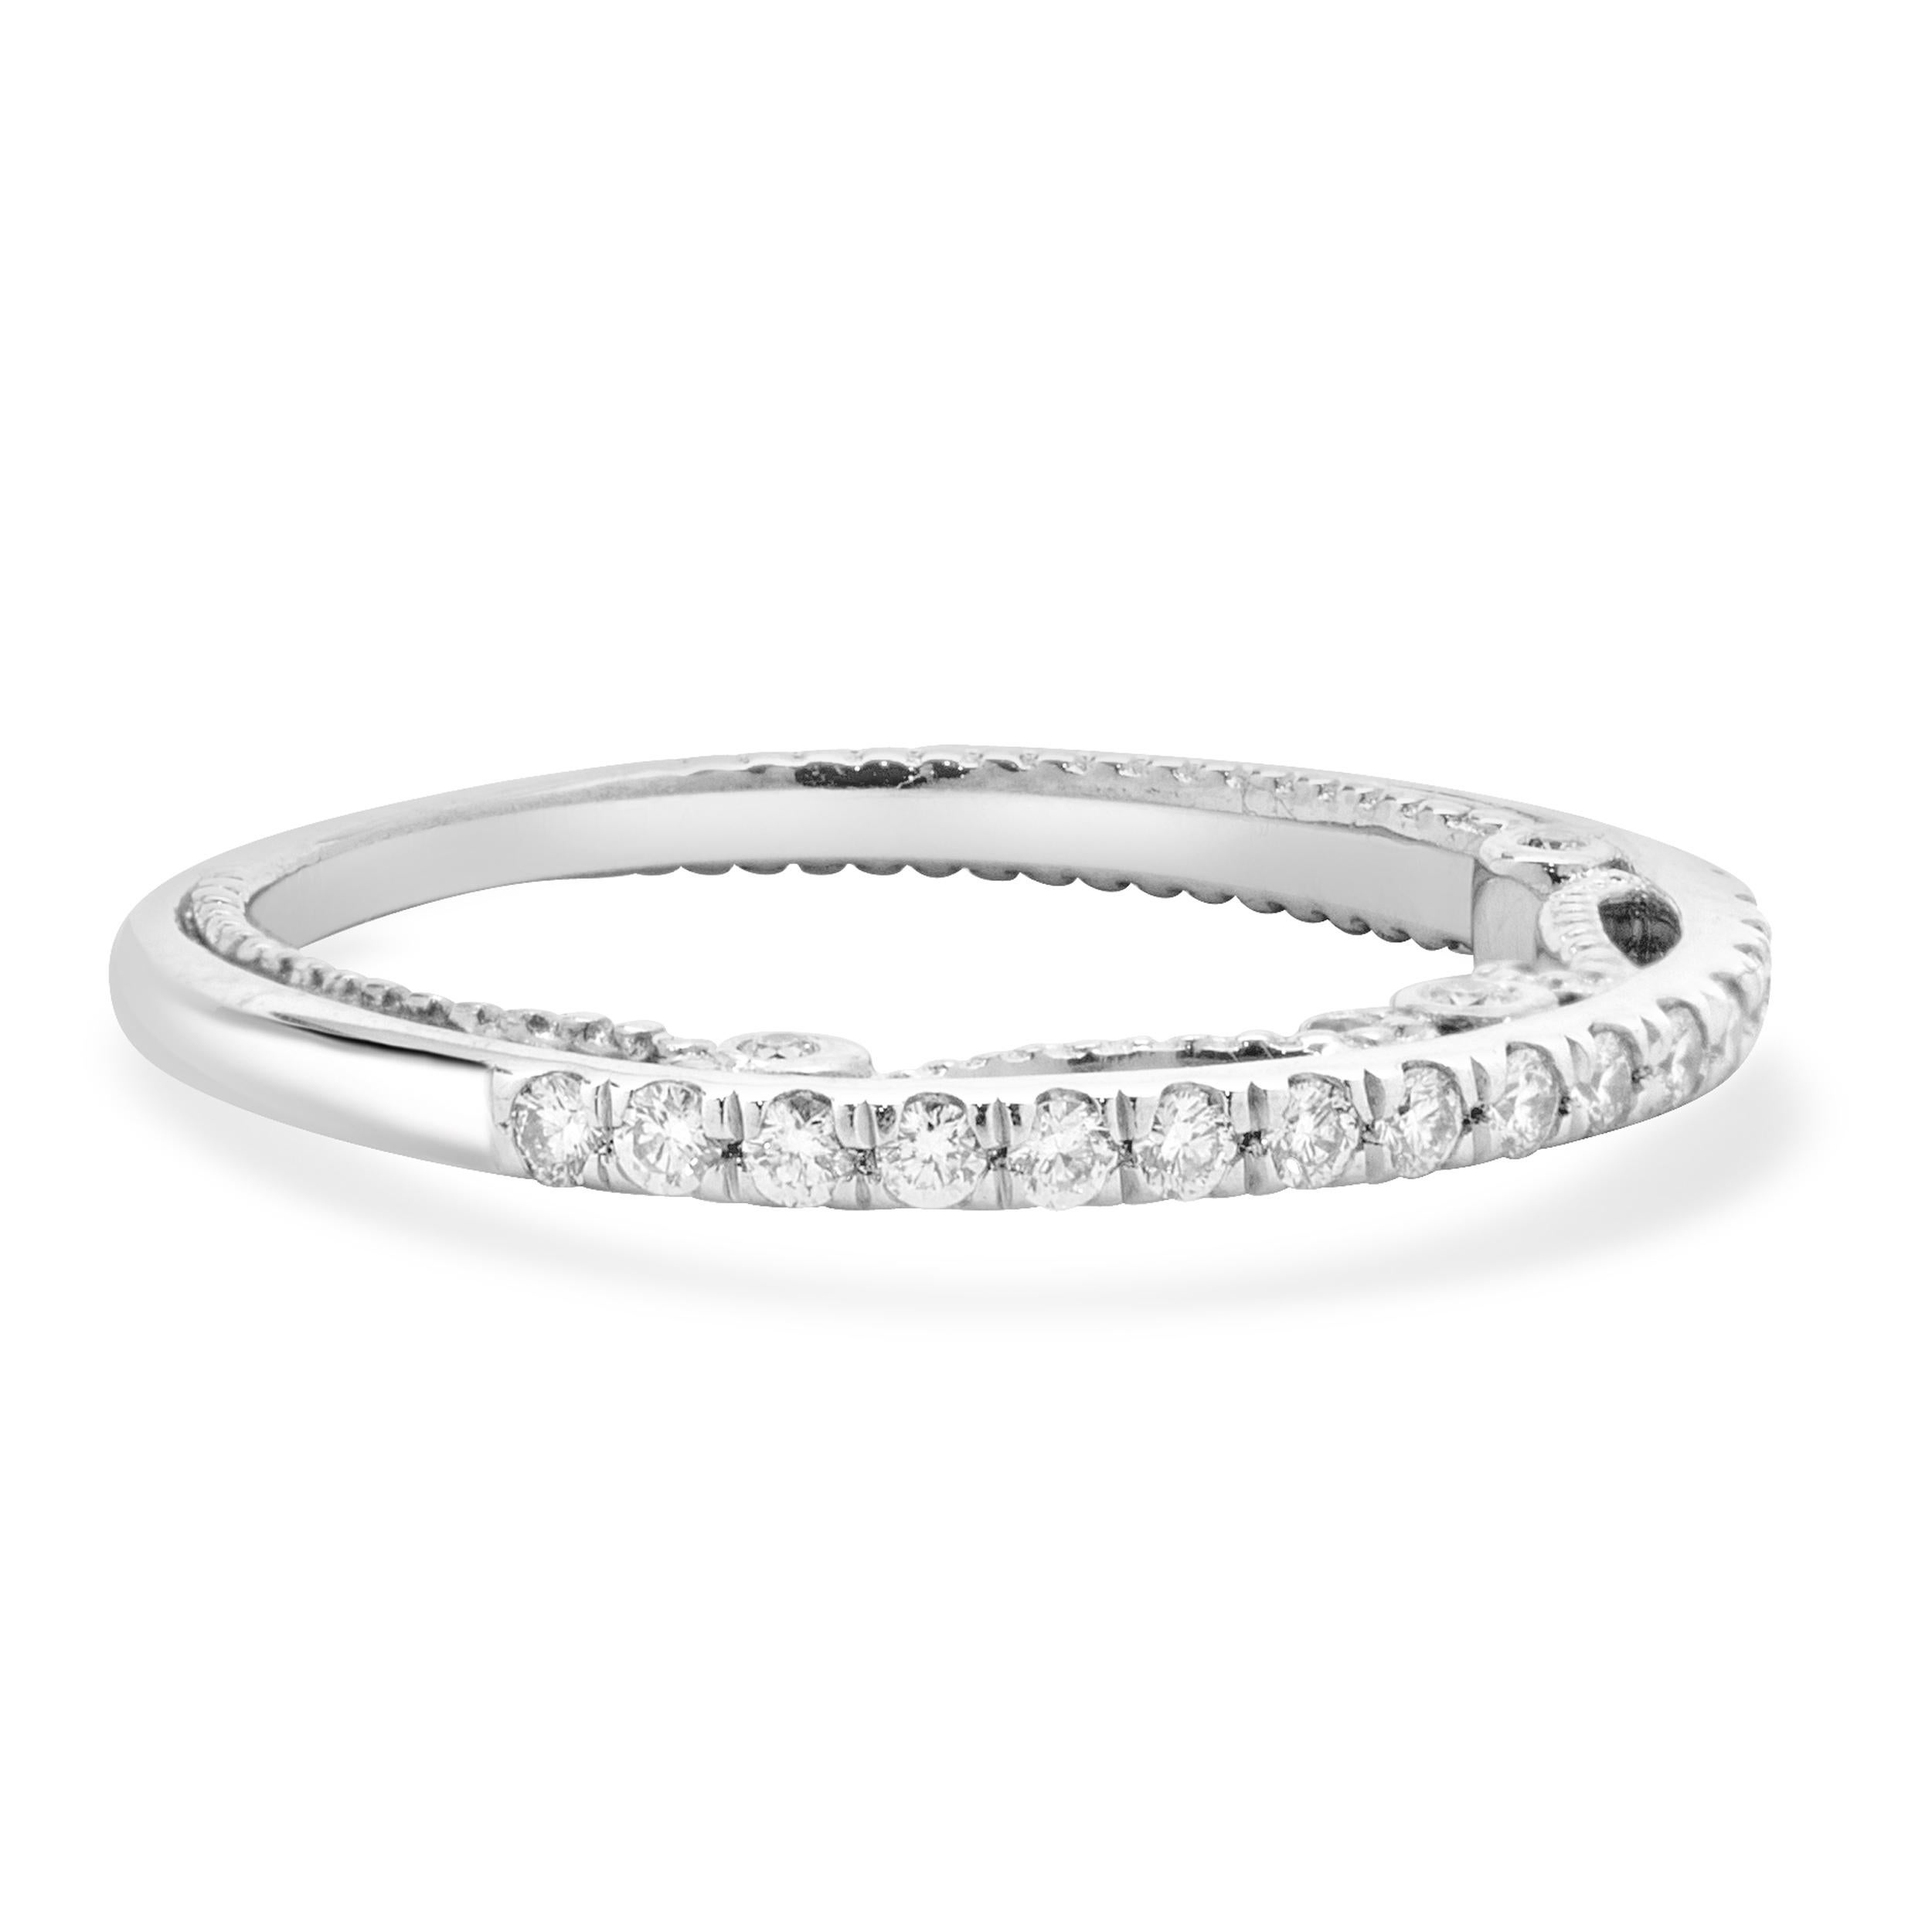 Designer: Custom
Material: 18K white gold
Diamonds: 25 round brilliant cut = 0.25cttw
Color: G
Clarity: VS1-2
Size: 5.5 sizing available 
Dimensions: ring measures 2mm in width
Weight: 2.44 grams
